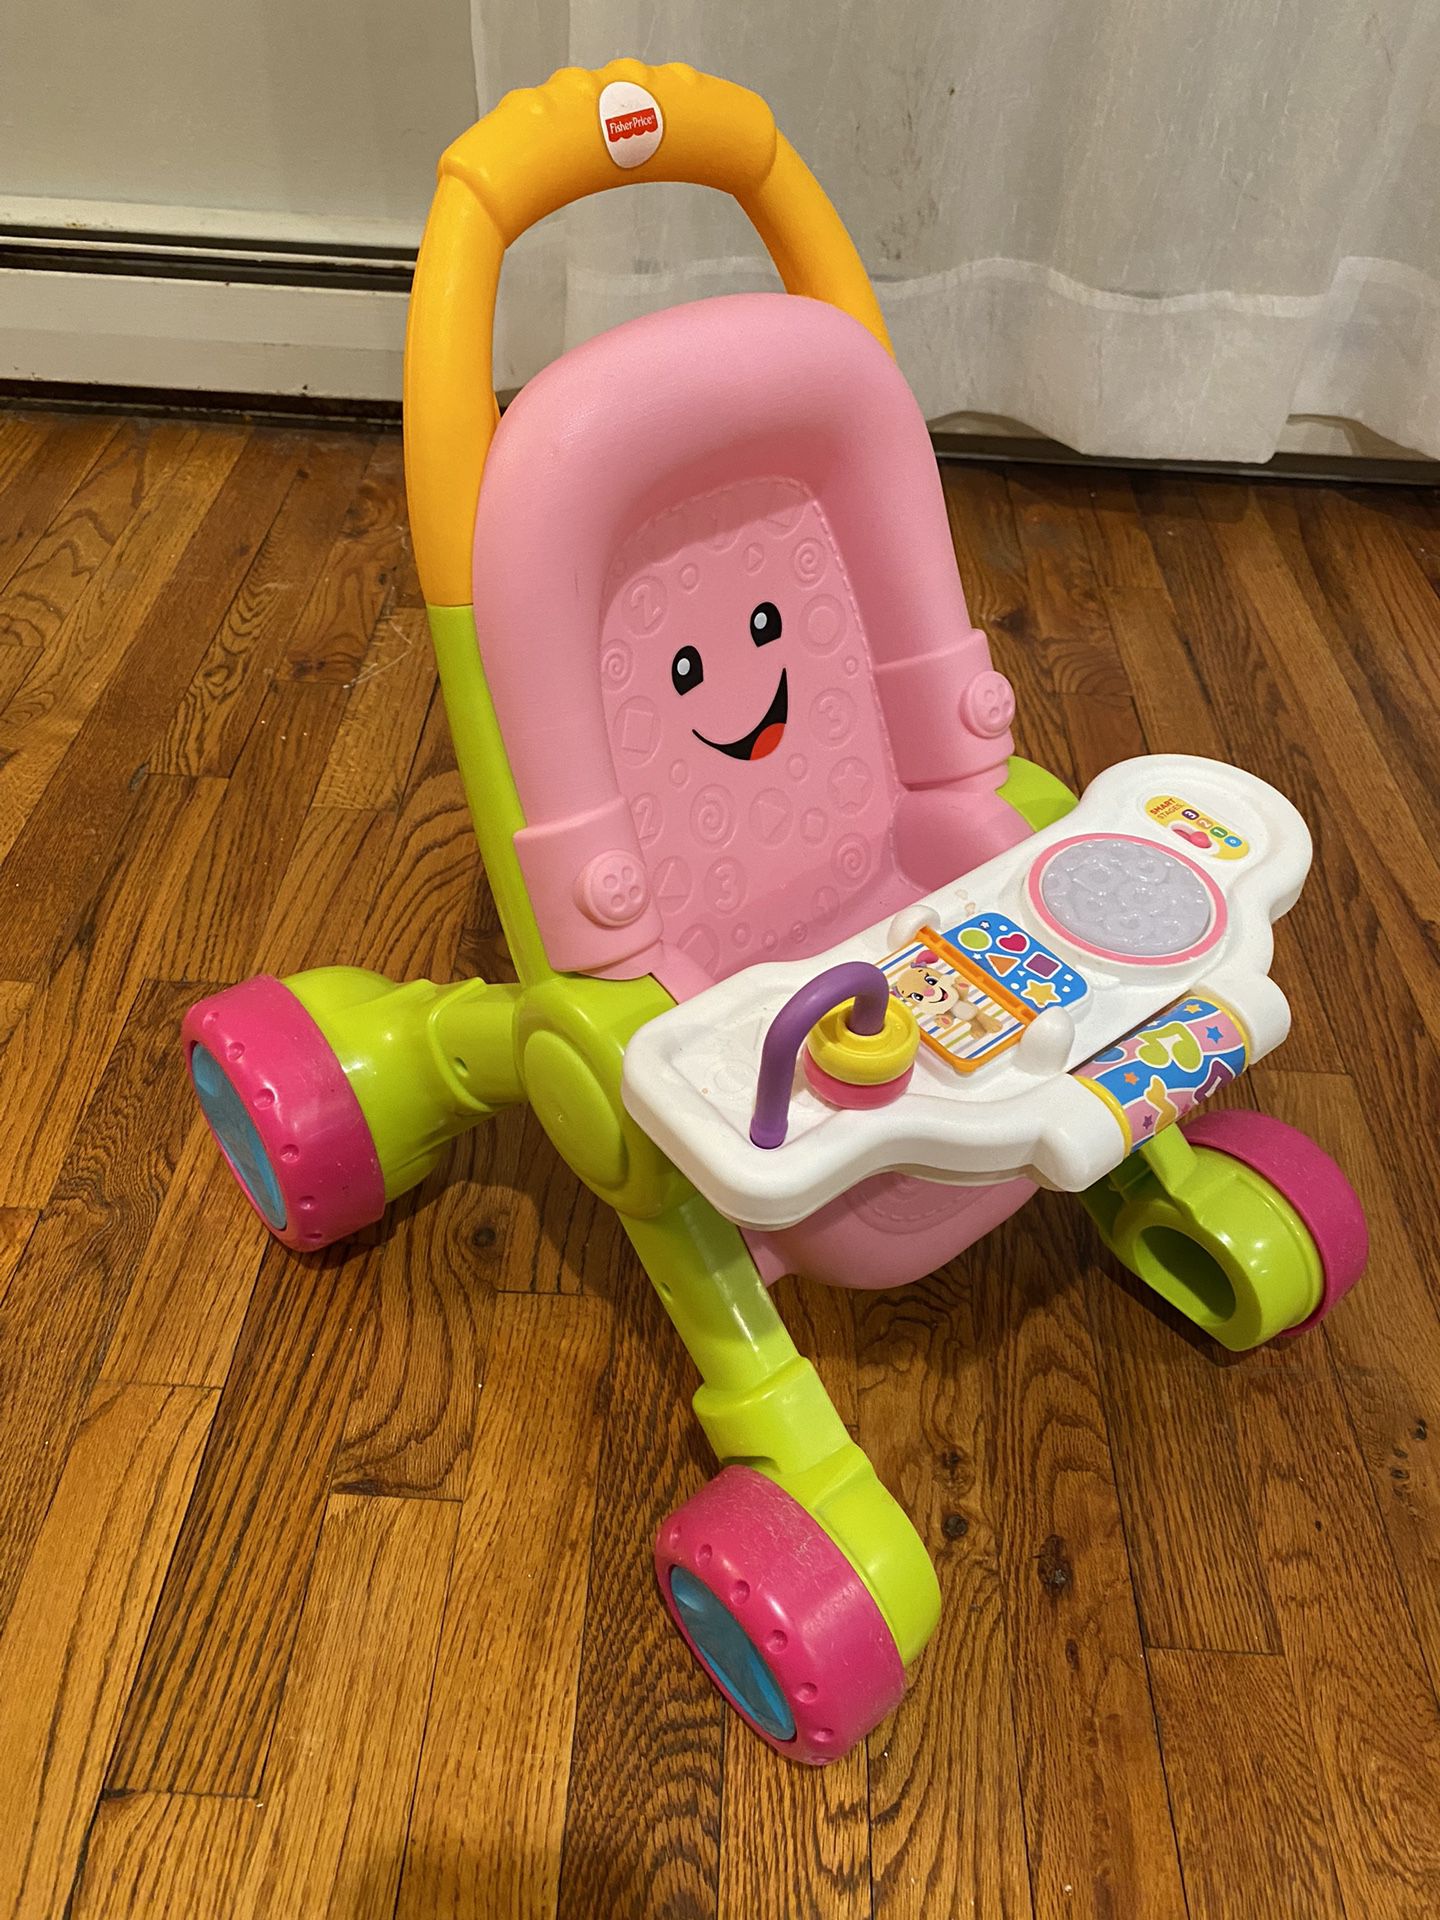 Toddler Toy Stroller Barely Used